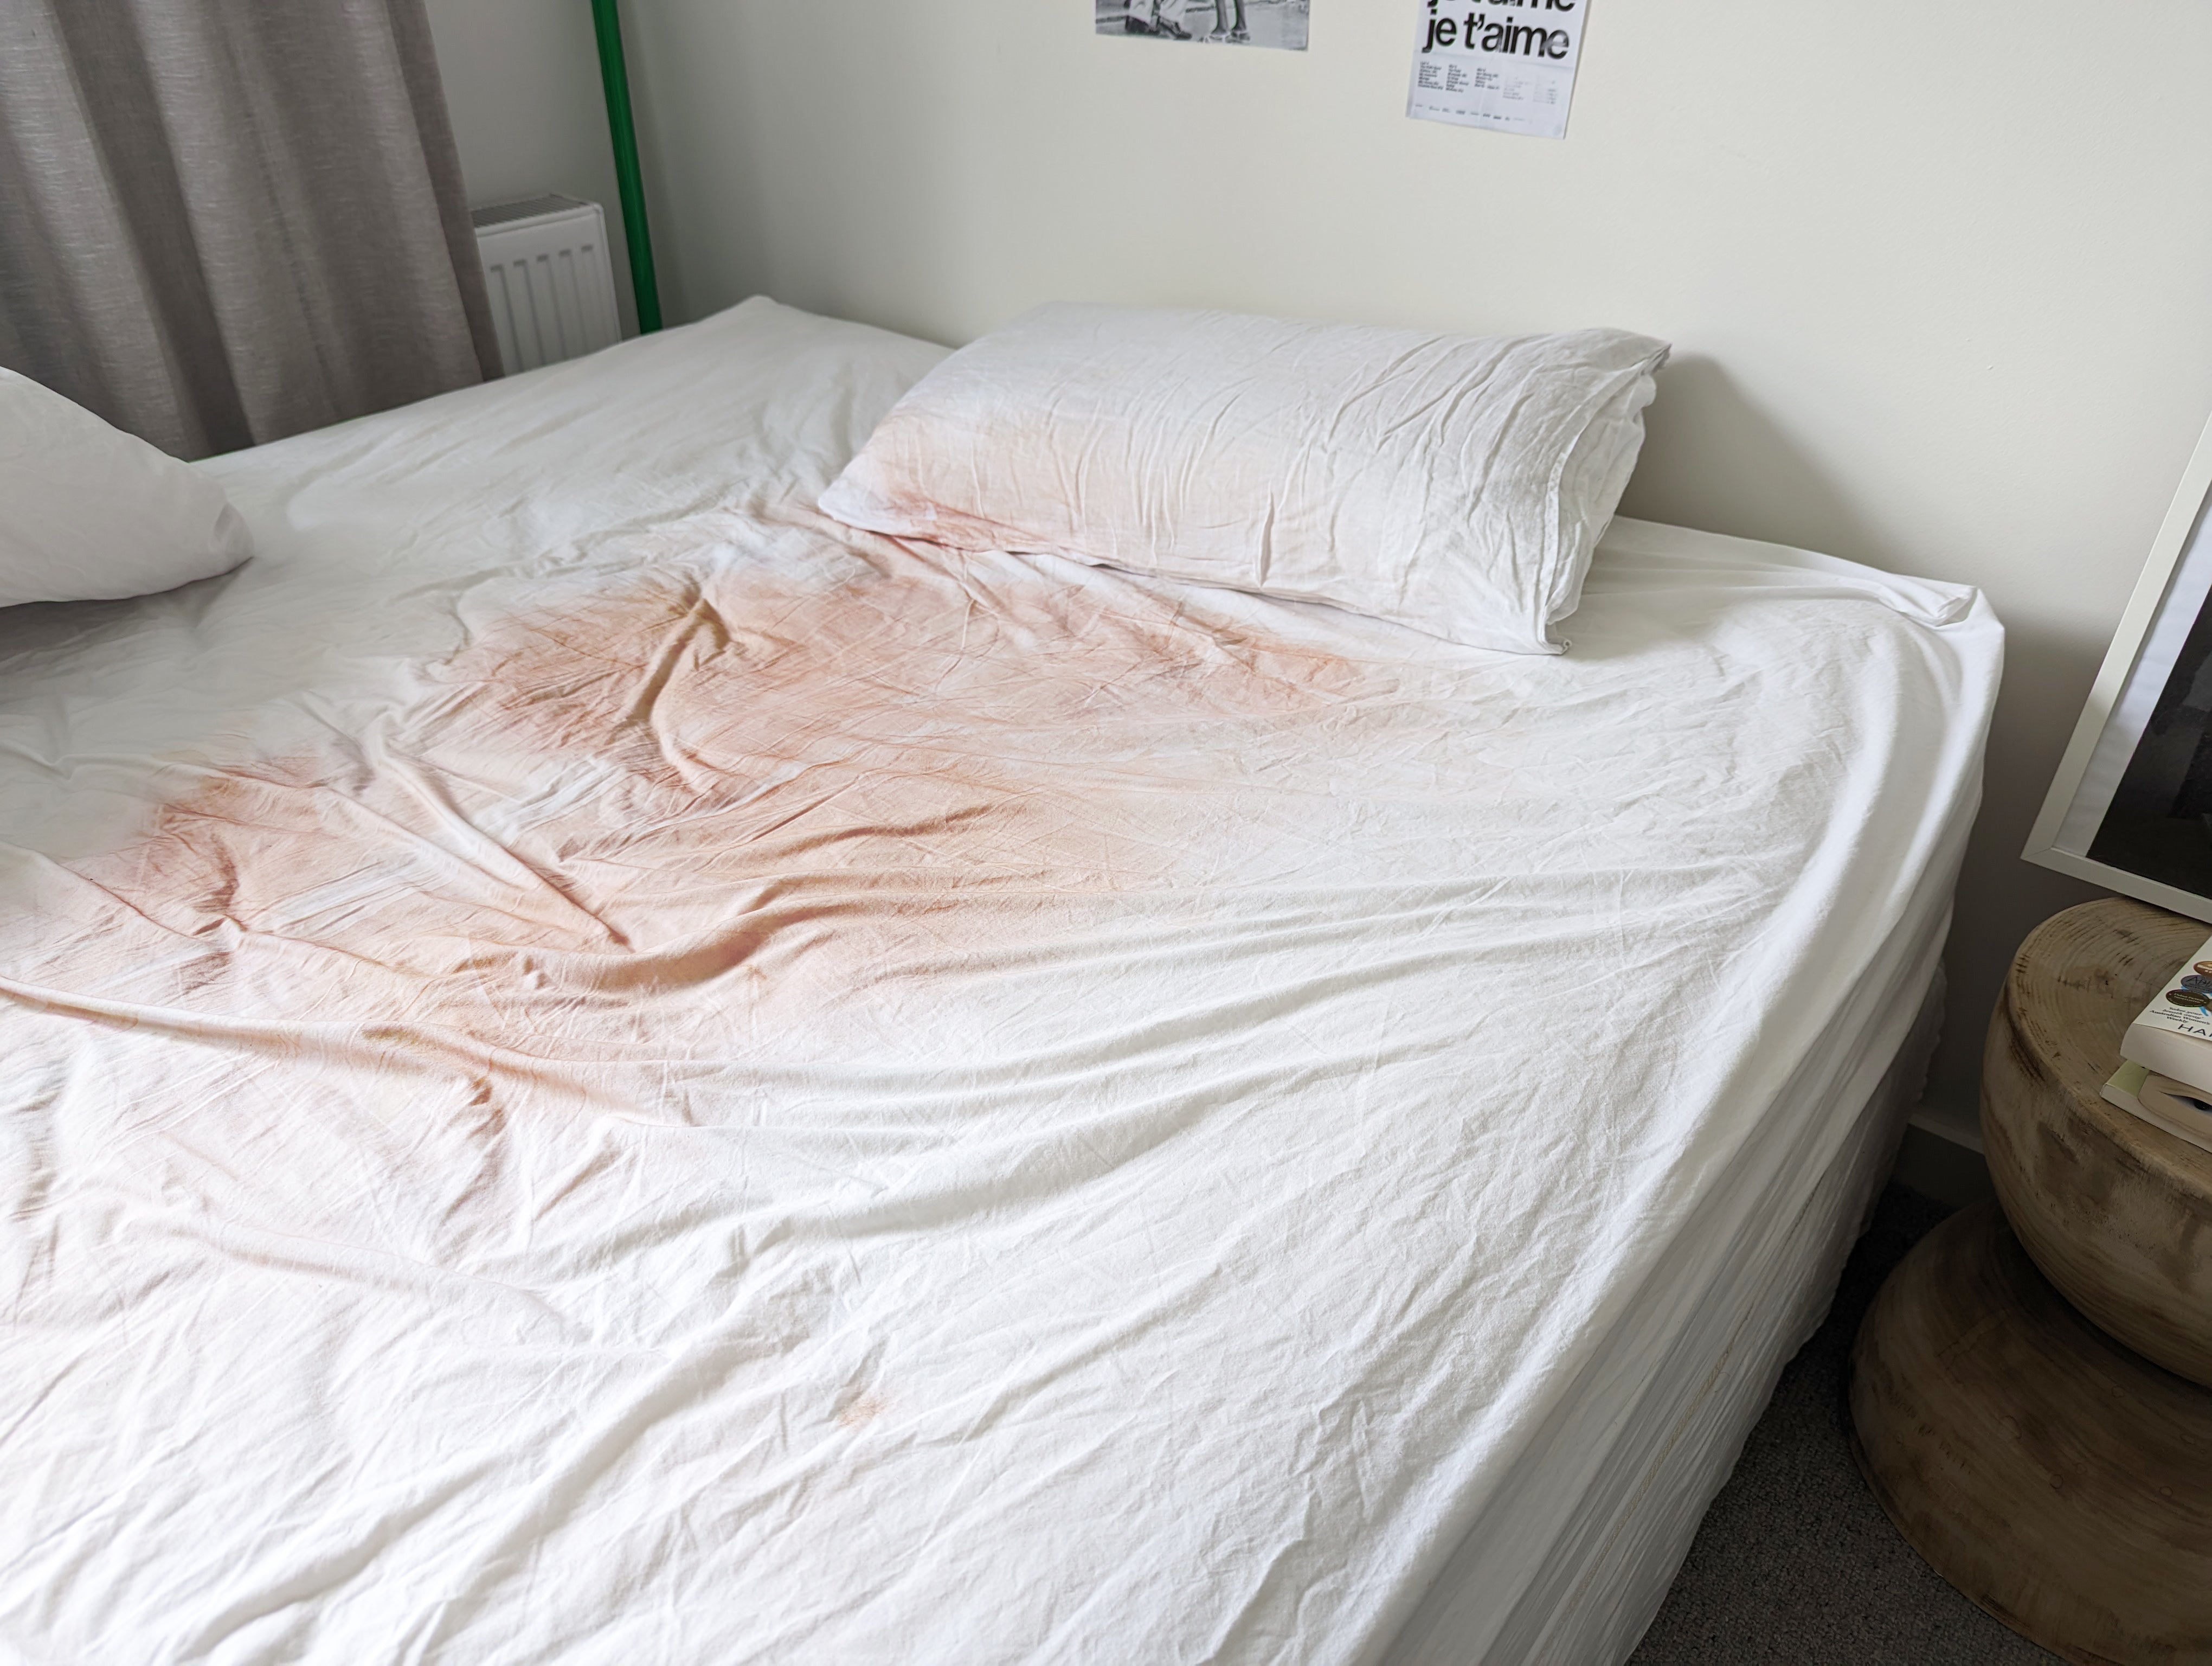 Why You Don't Want Stained Bed Sheets After Self-Tanning